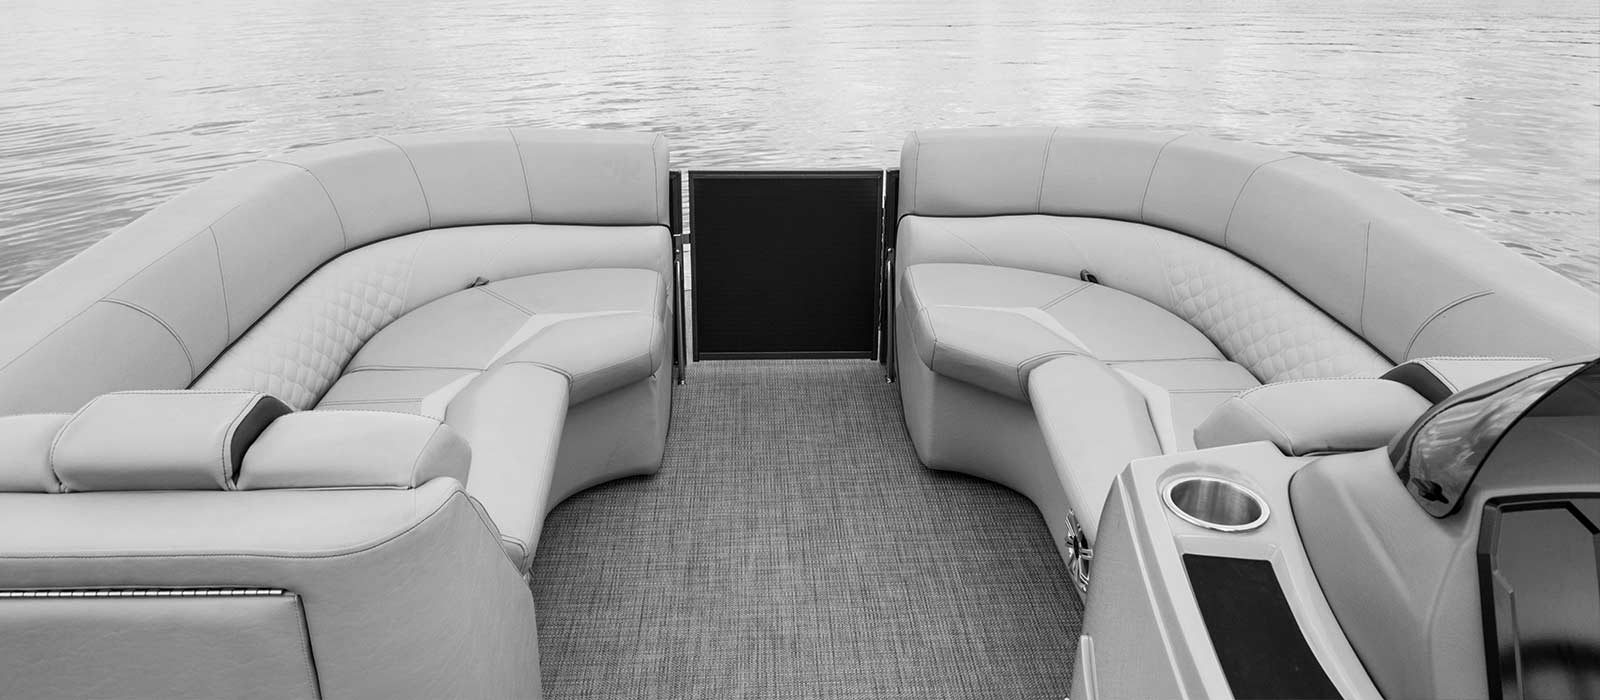 Taylor Made Boat Parts & Accessories | Boat Seats & Pontoon Furniture